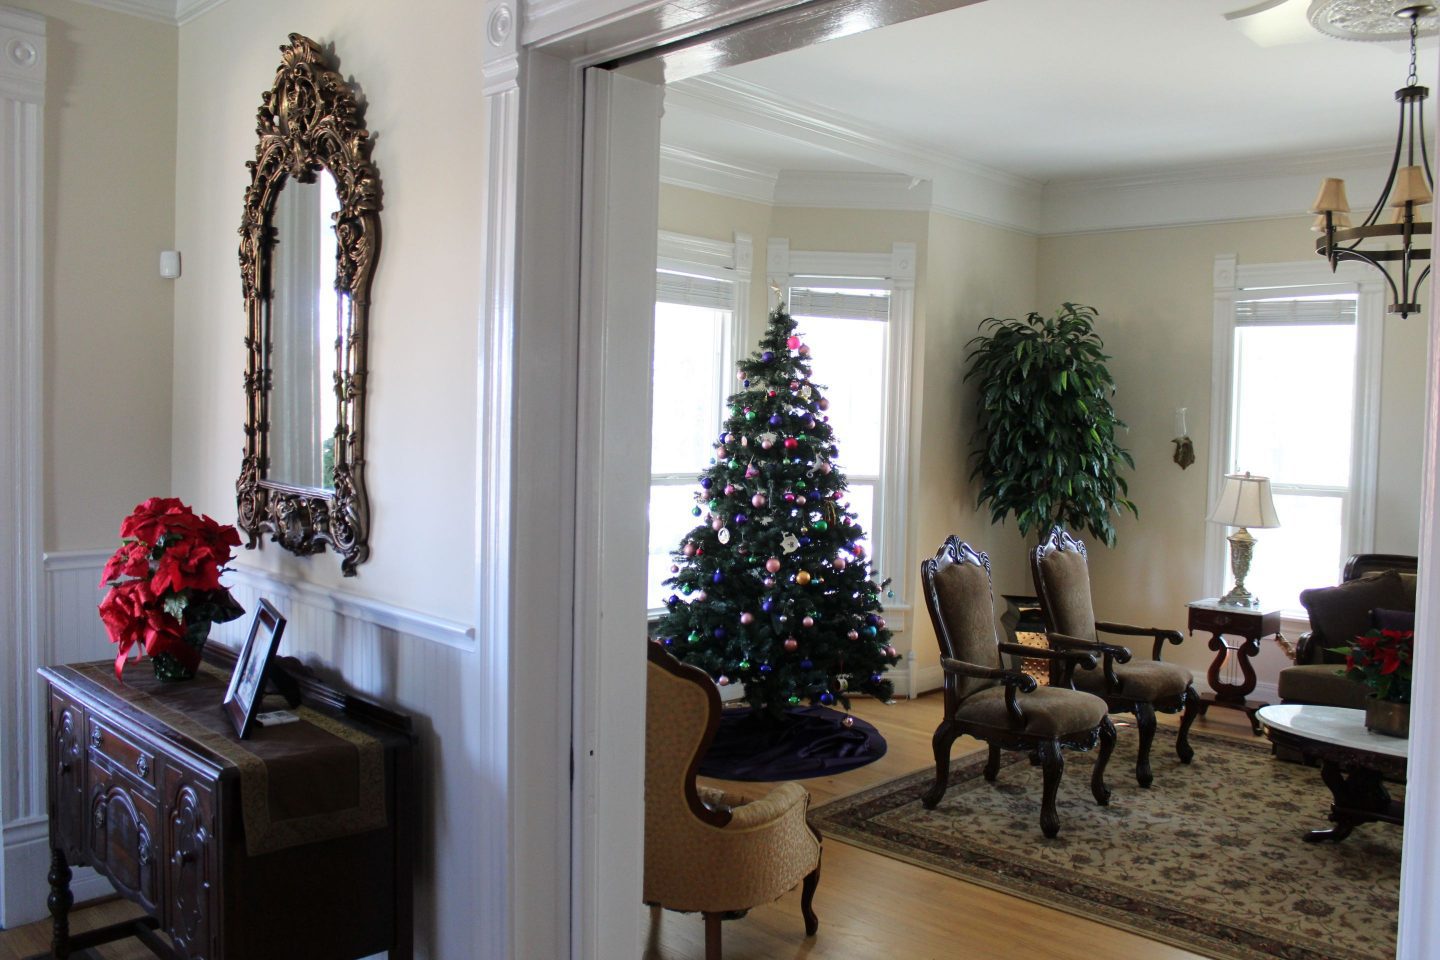 HBCU Holiday House: Wiley College Christmas Decor Tour